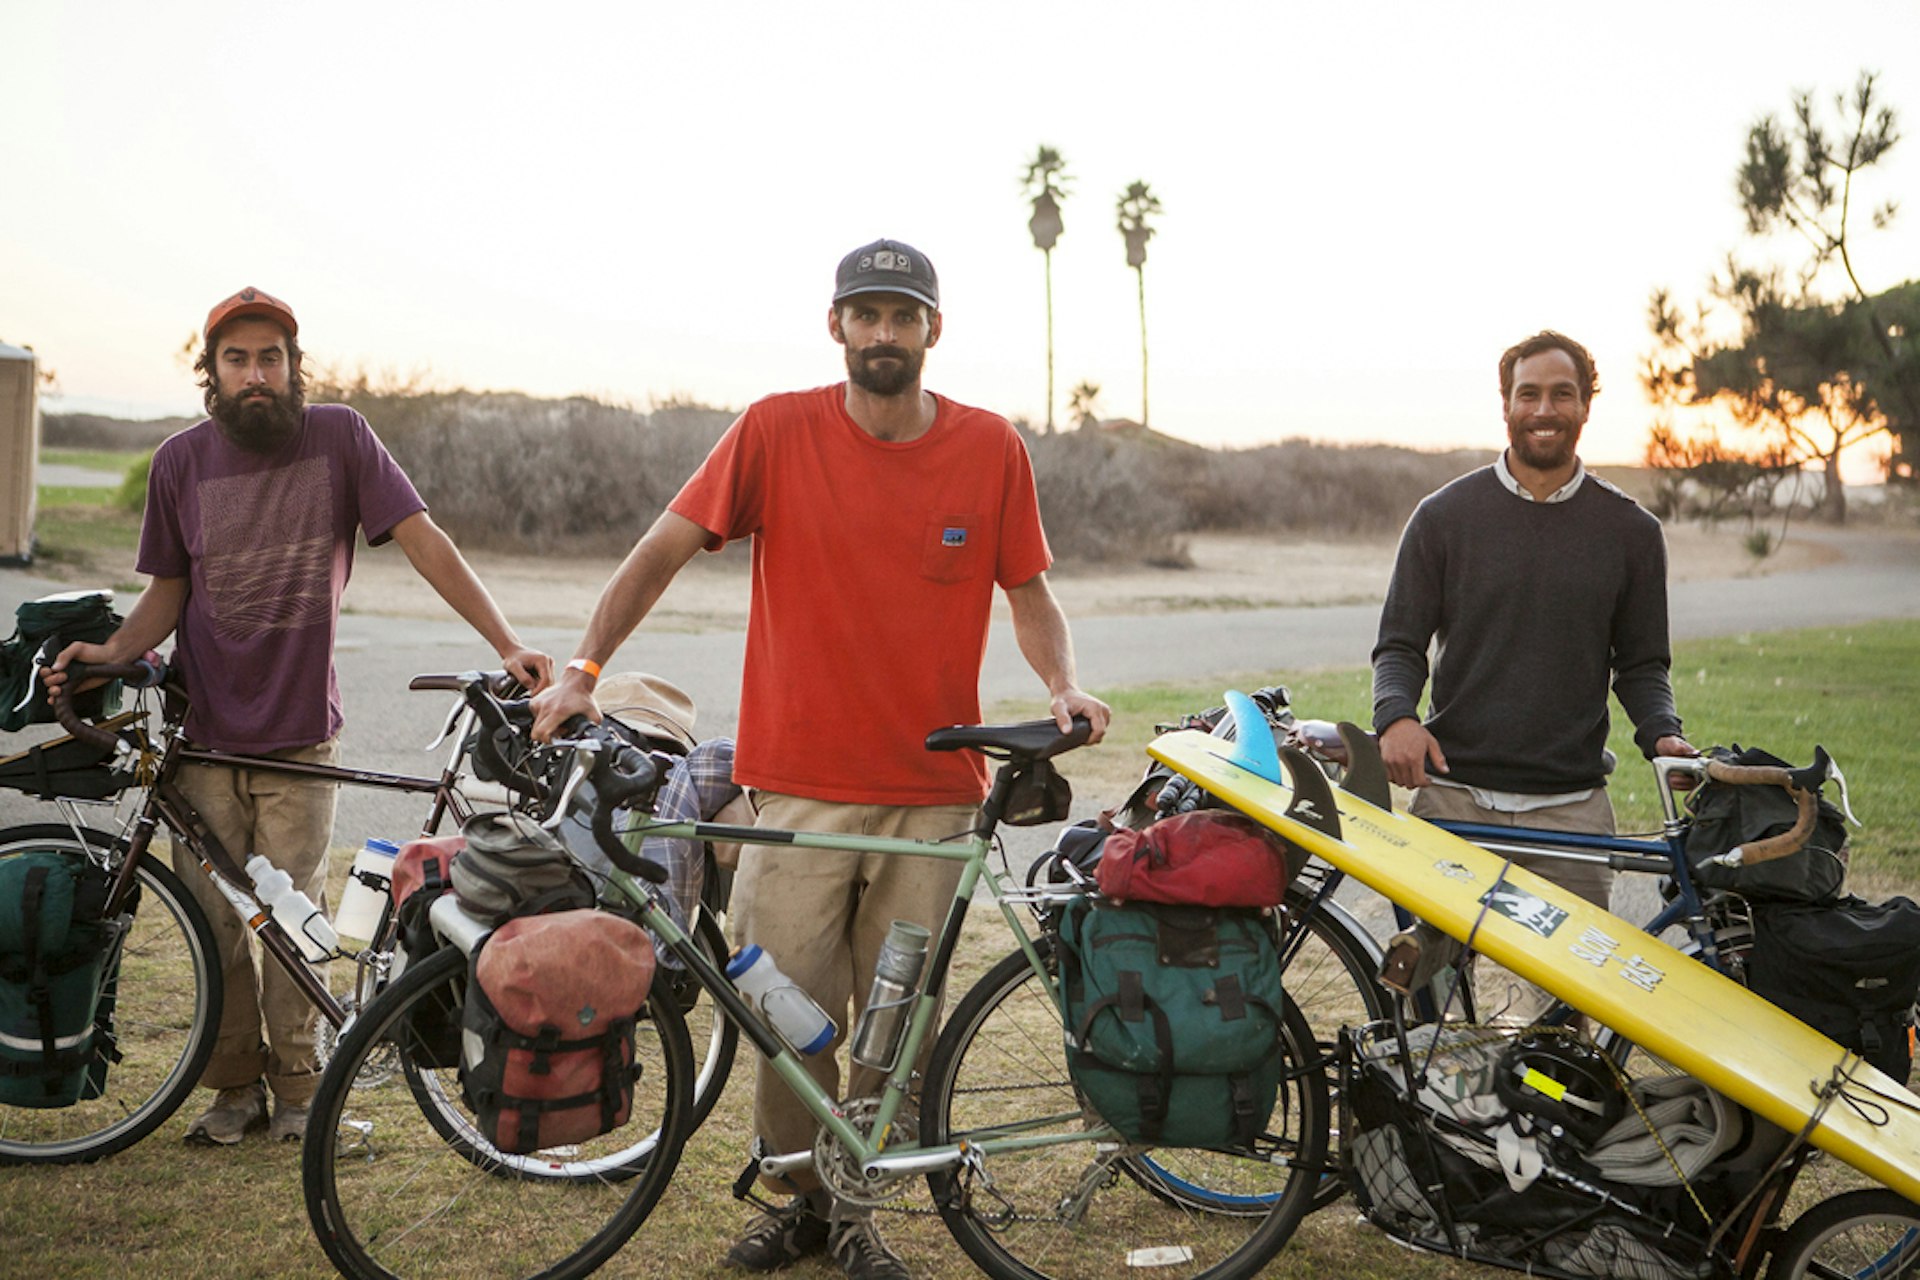 How an epic cycle trip taught surfer Dan Malloy to see California in a whole new light